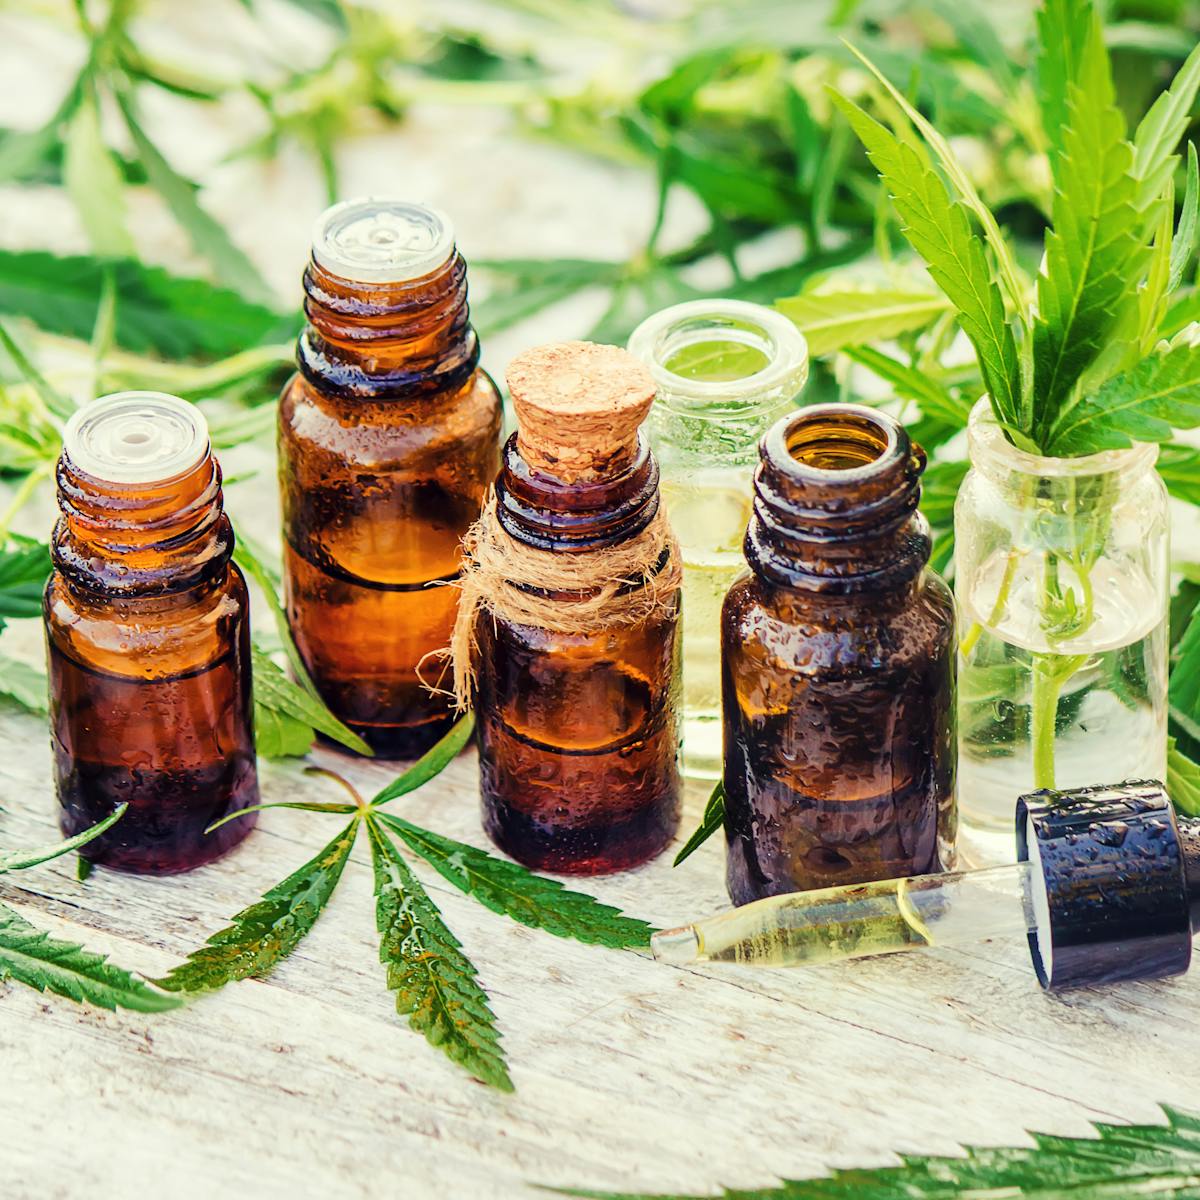 CBD Oil: what you need to know